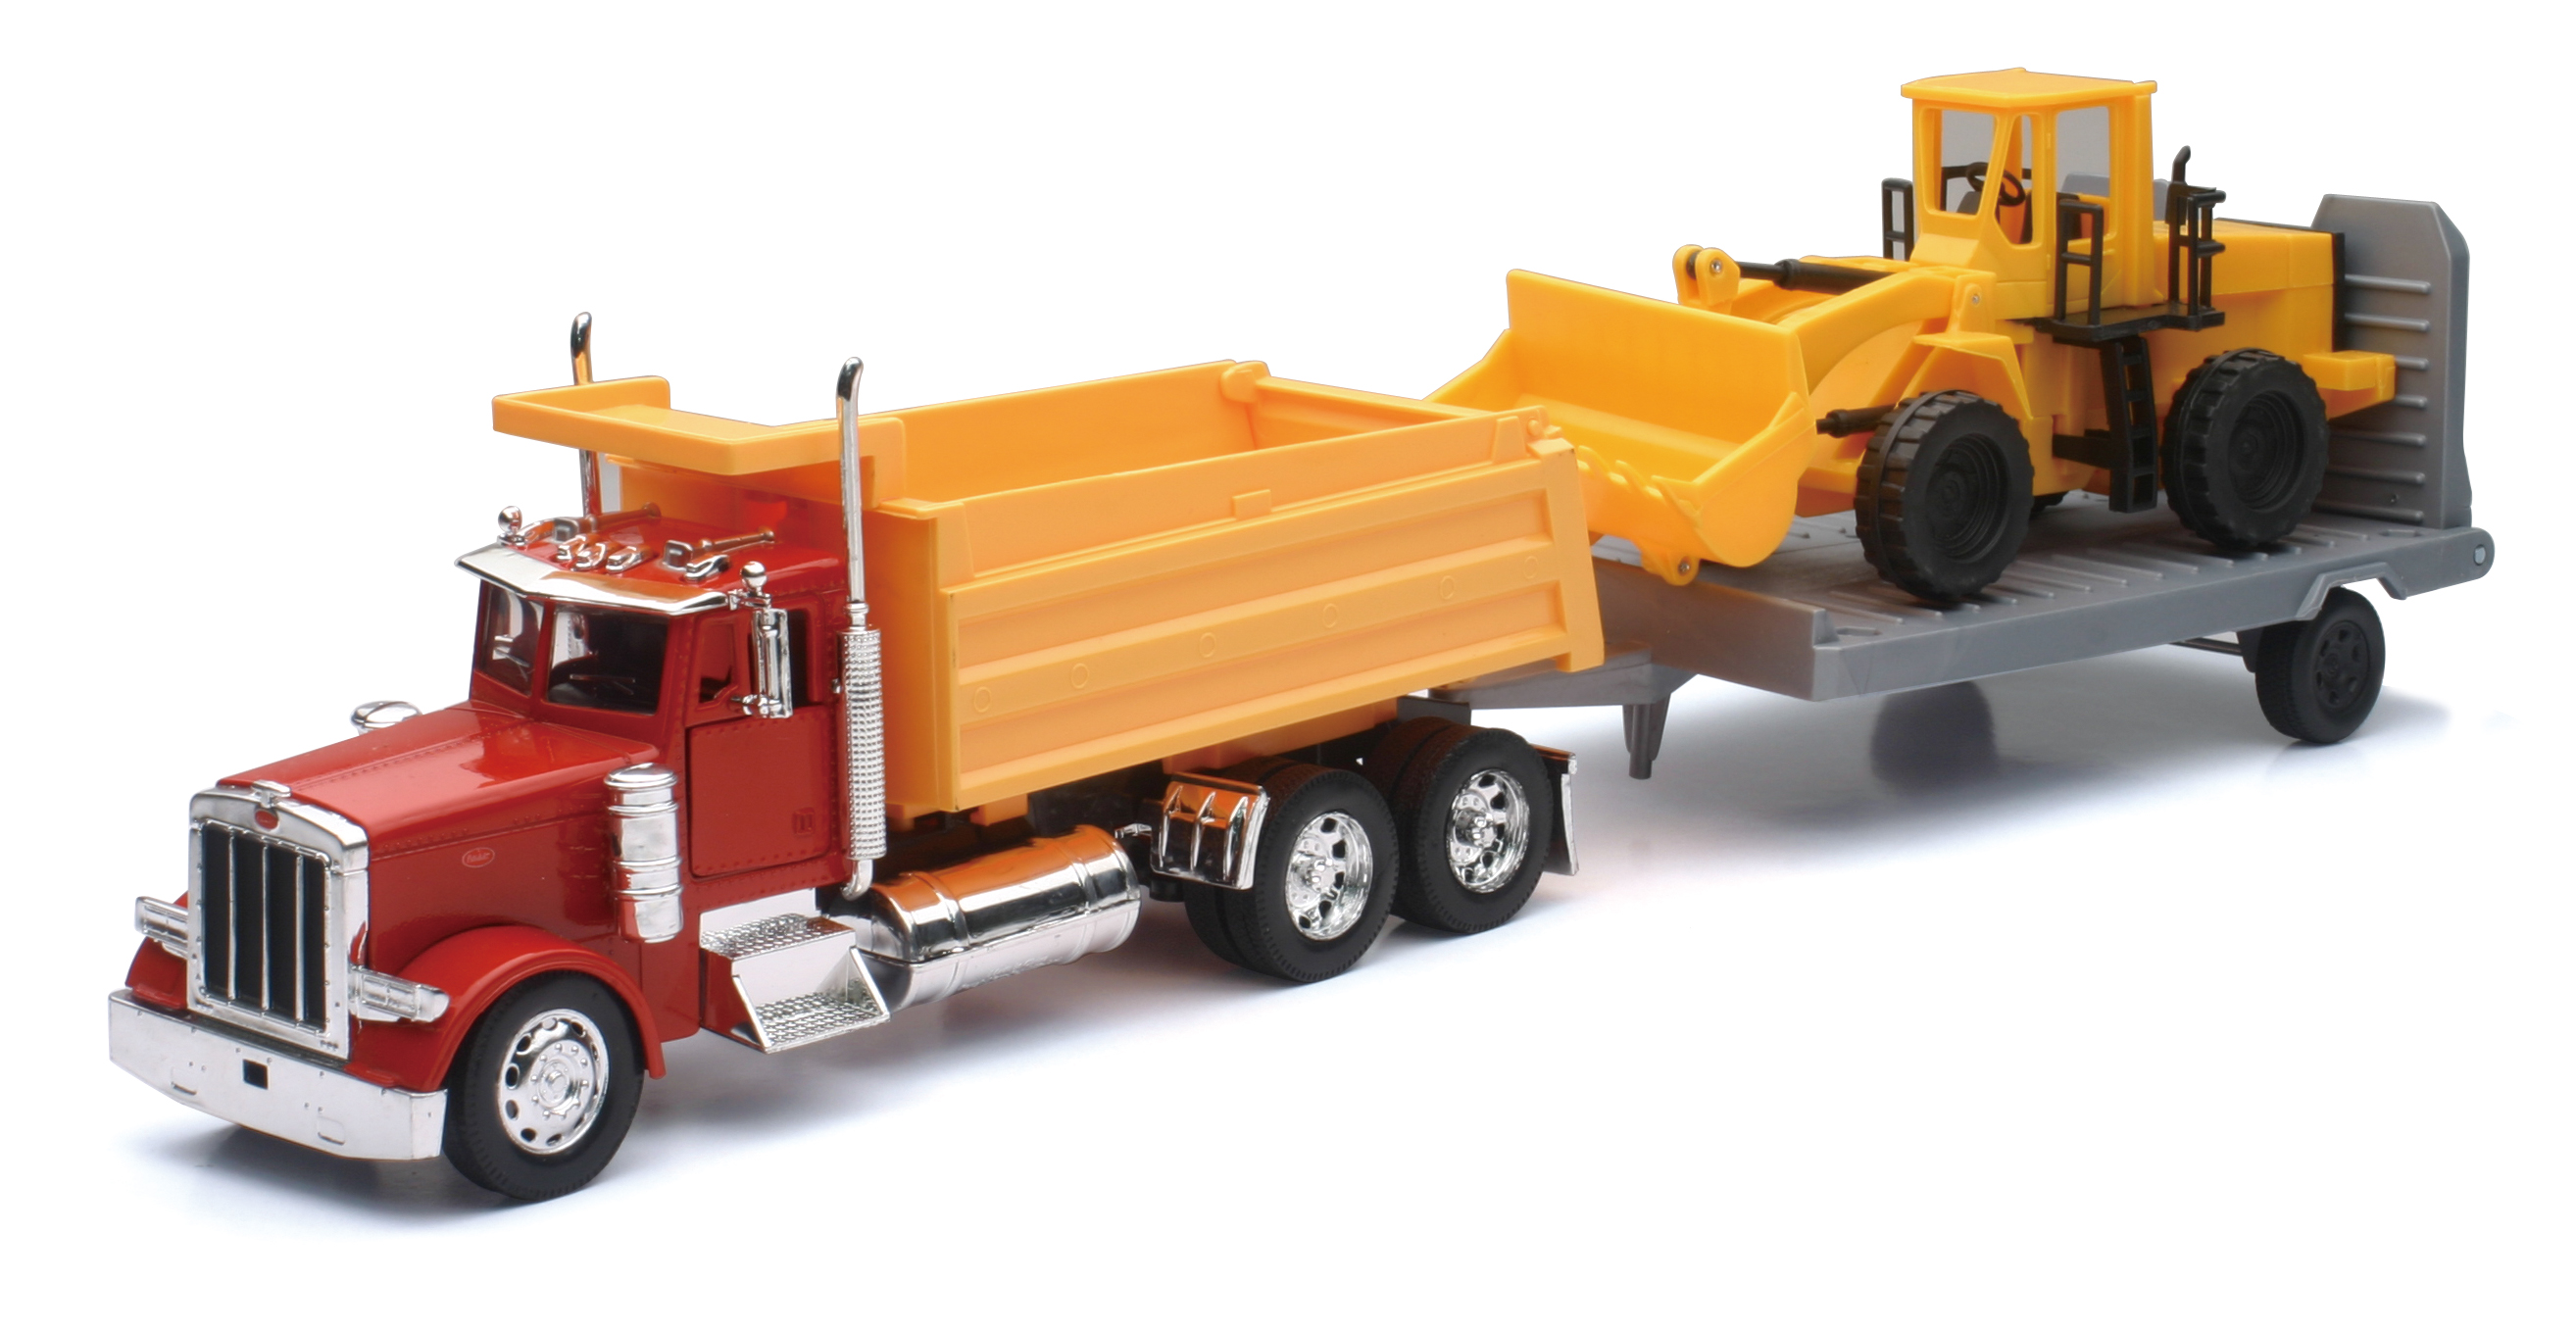 Peterbilt Dump Truck with Wheel Loader and Flatbed Trailer